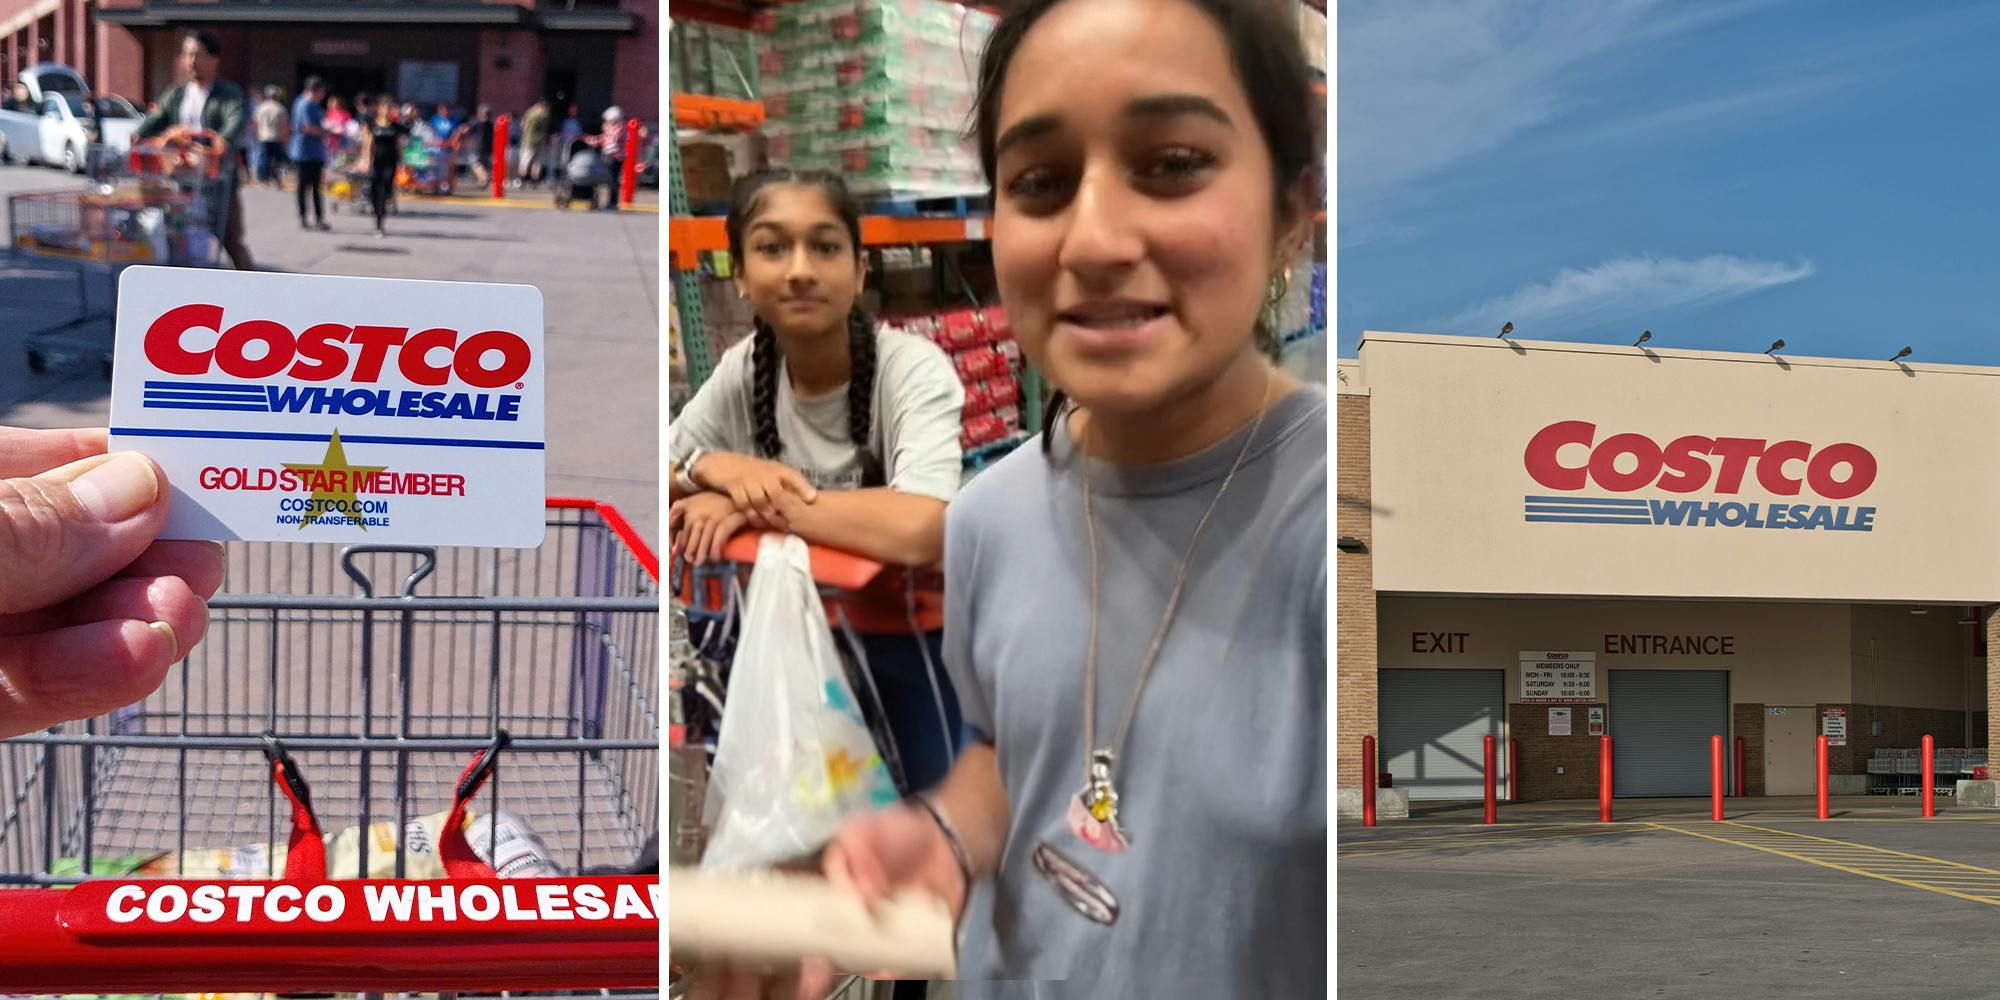 Costco customers use family card to grocery shop in-store